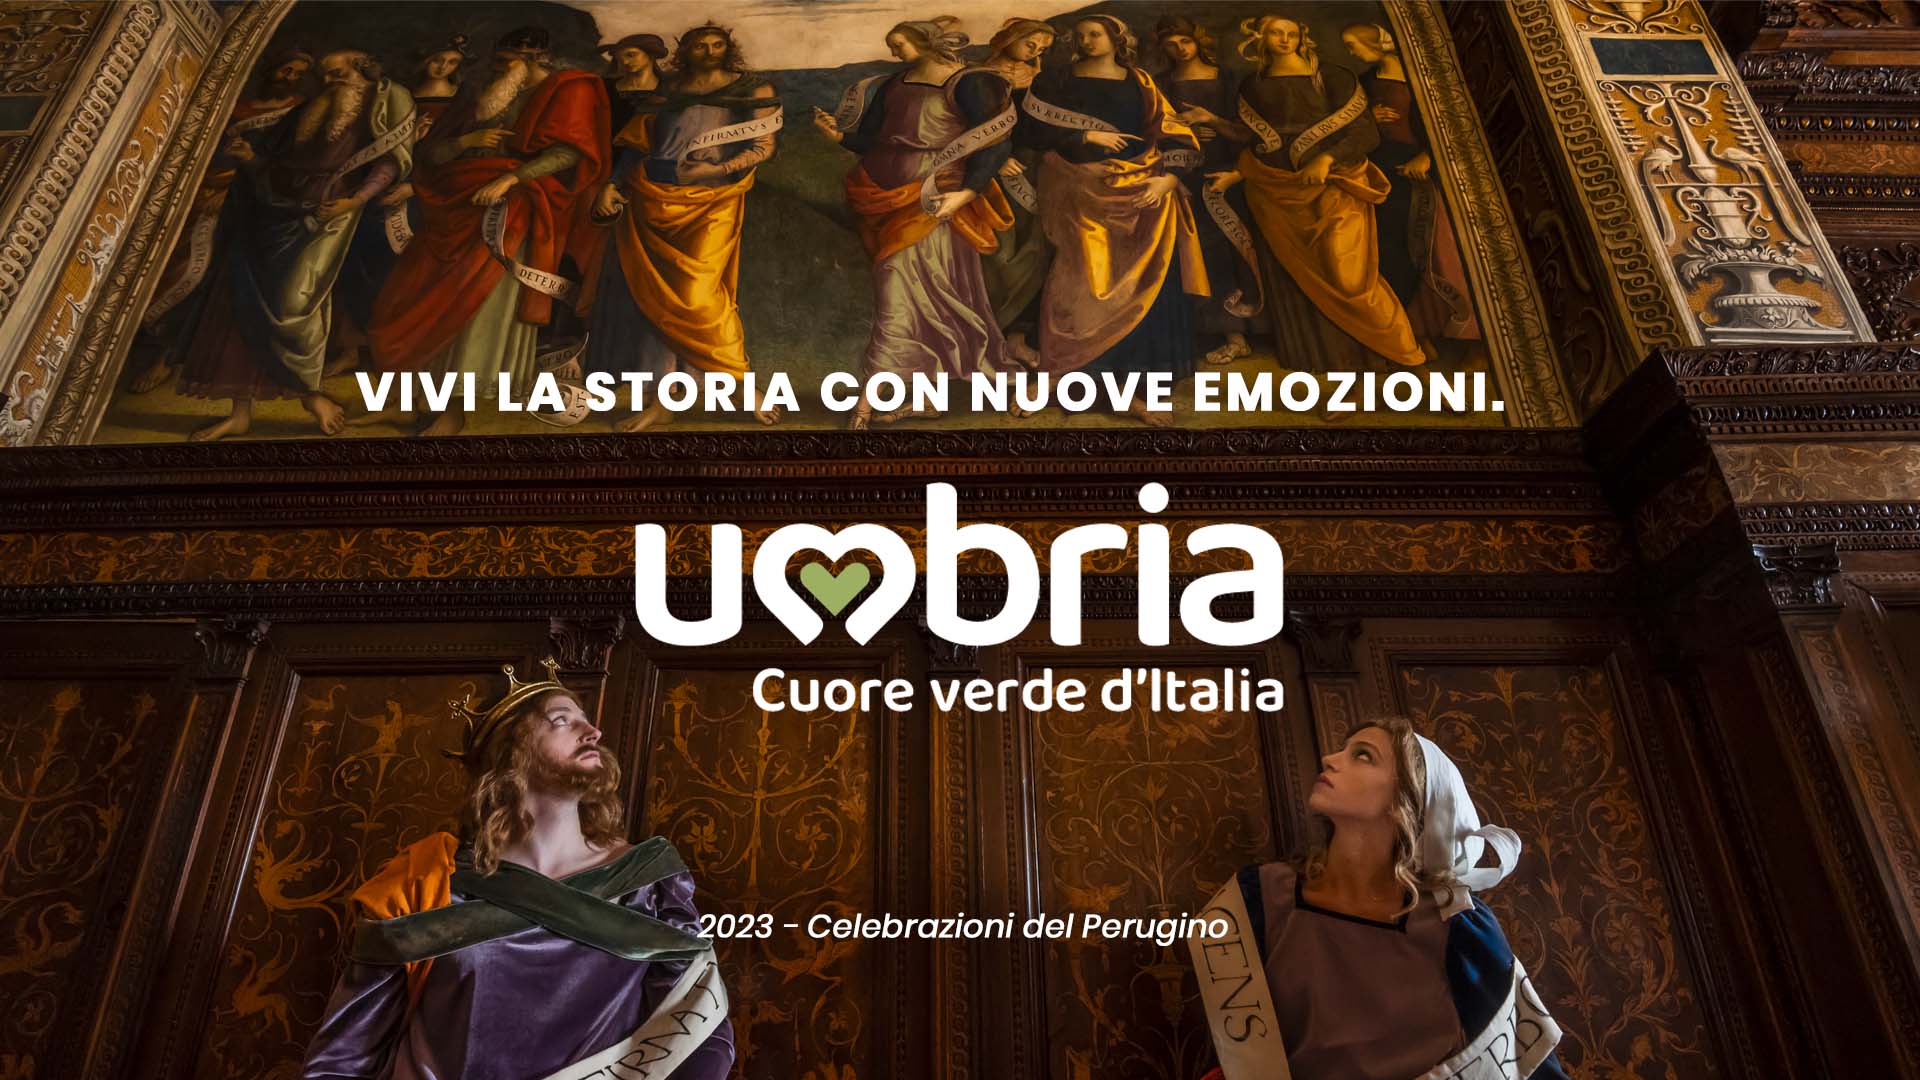 The new promotional campaign for winter tourism in the region of Umbria, created by Armando Testa has been on air since 13 November